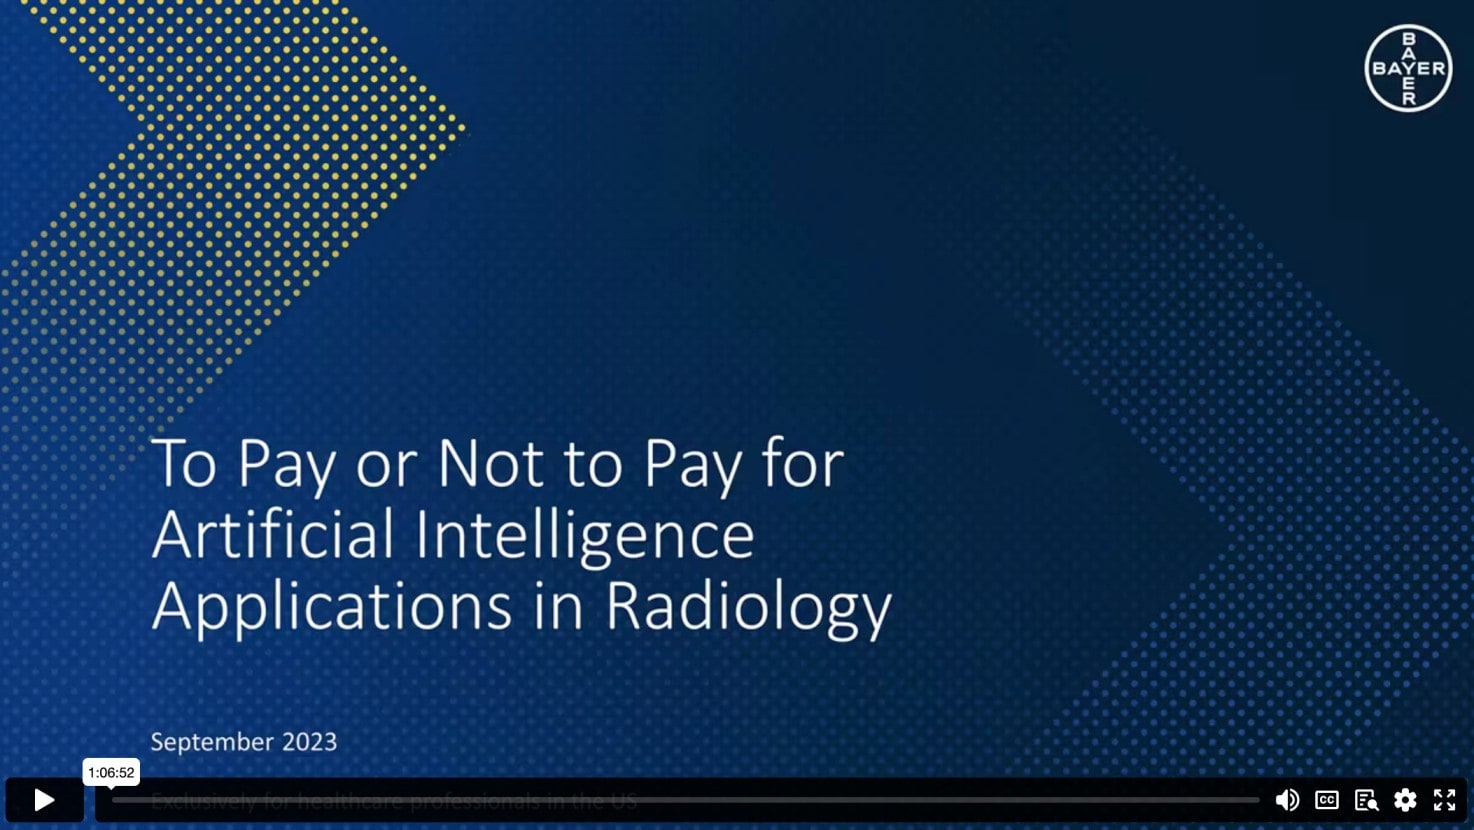 To Pay or Not to Pay for the Artificial Intelligence Applications in Radiology